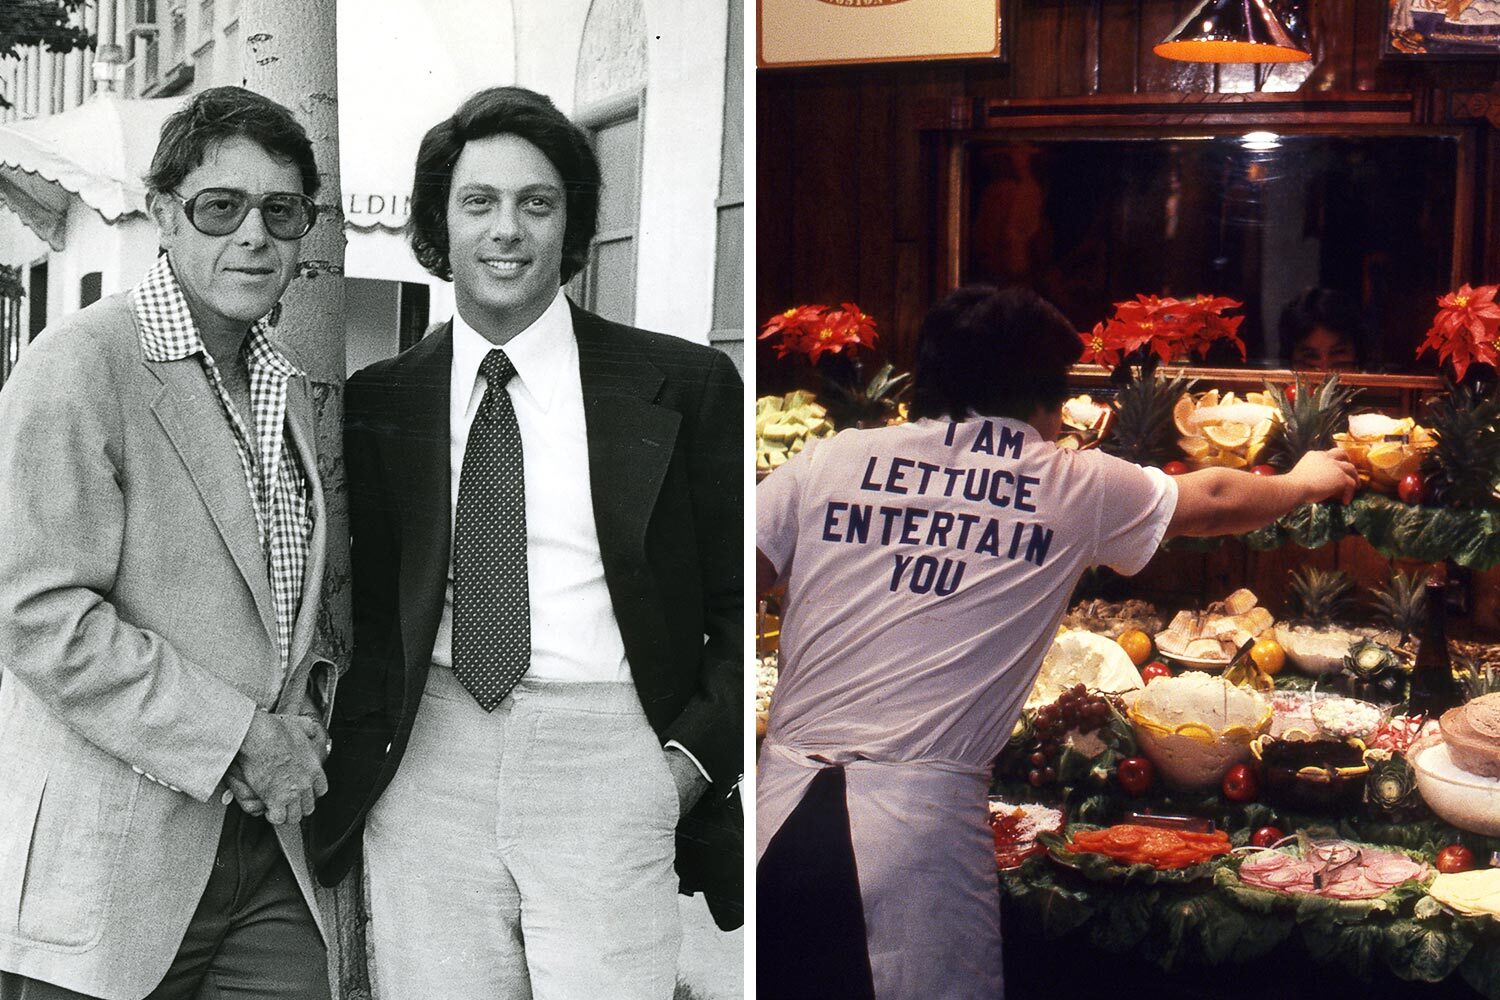 Left: Jerry A. Orzoff and Rich Melman, founding partners of Lettuce Entertain You